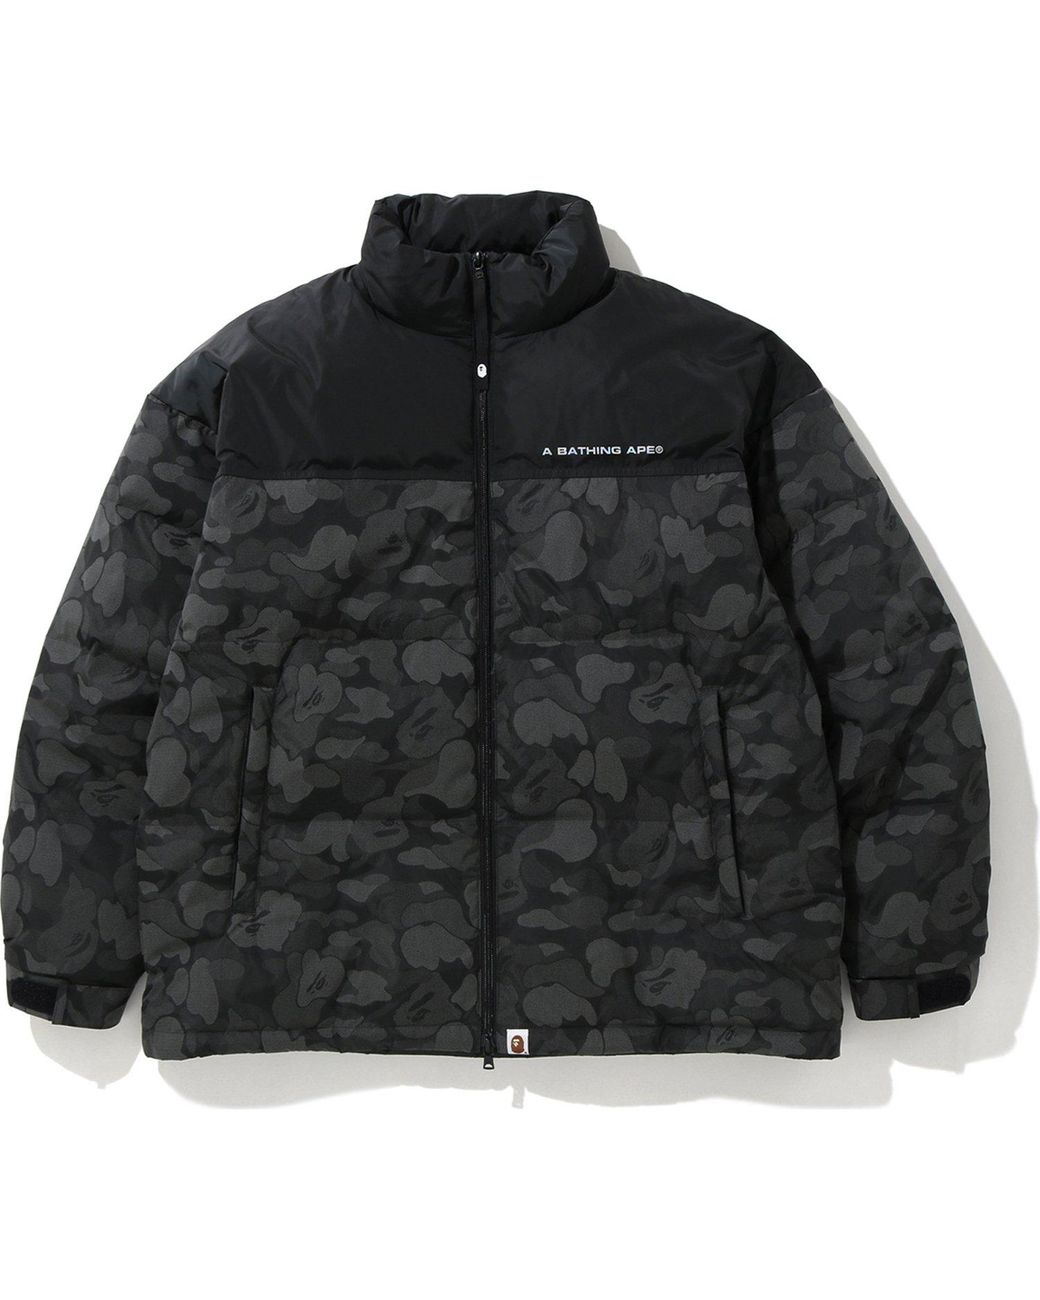 A Bathing Ape Abc Dot Reflective Camo Down Jacket in Black for Men - Lyst